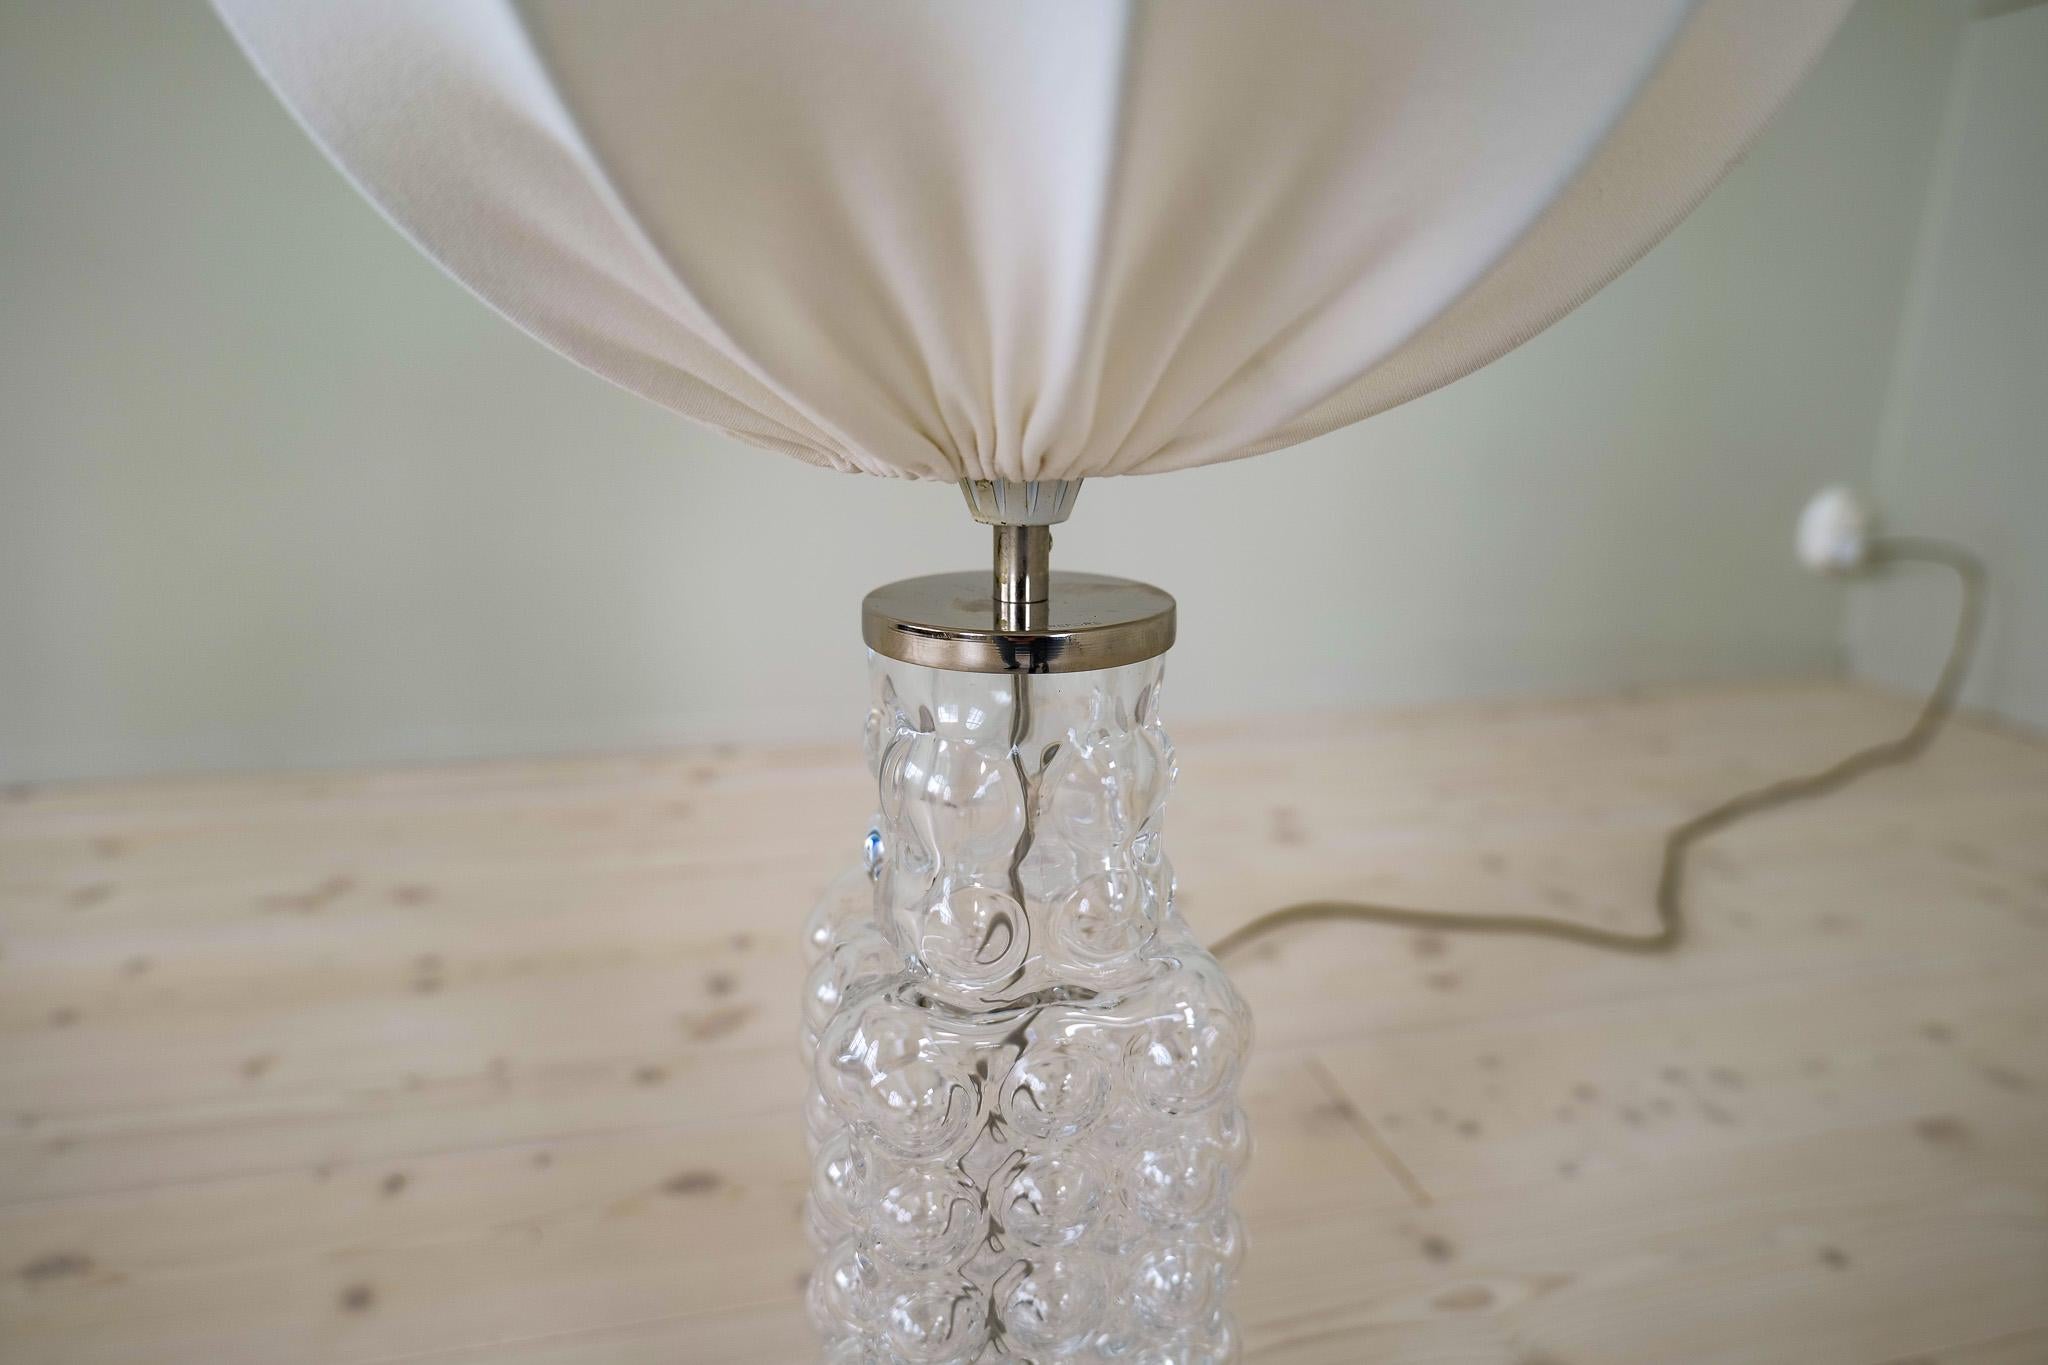 Midcentury Modern Drop Shaped Crystal Rare Table Lamp Orrefors by Carl Fagerlund In Good Condition For Sale In Hillringsberg, SE